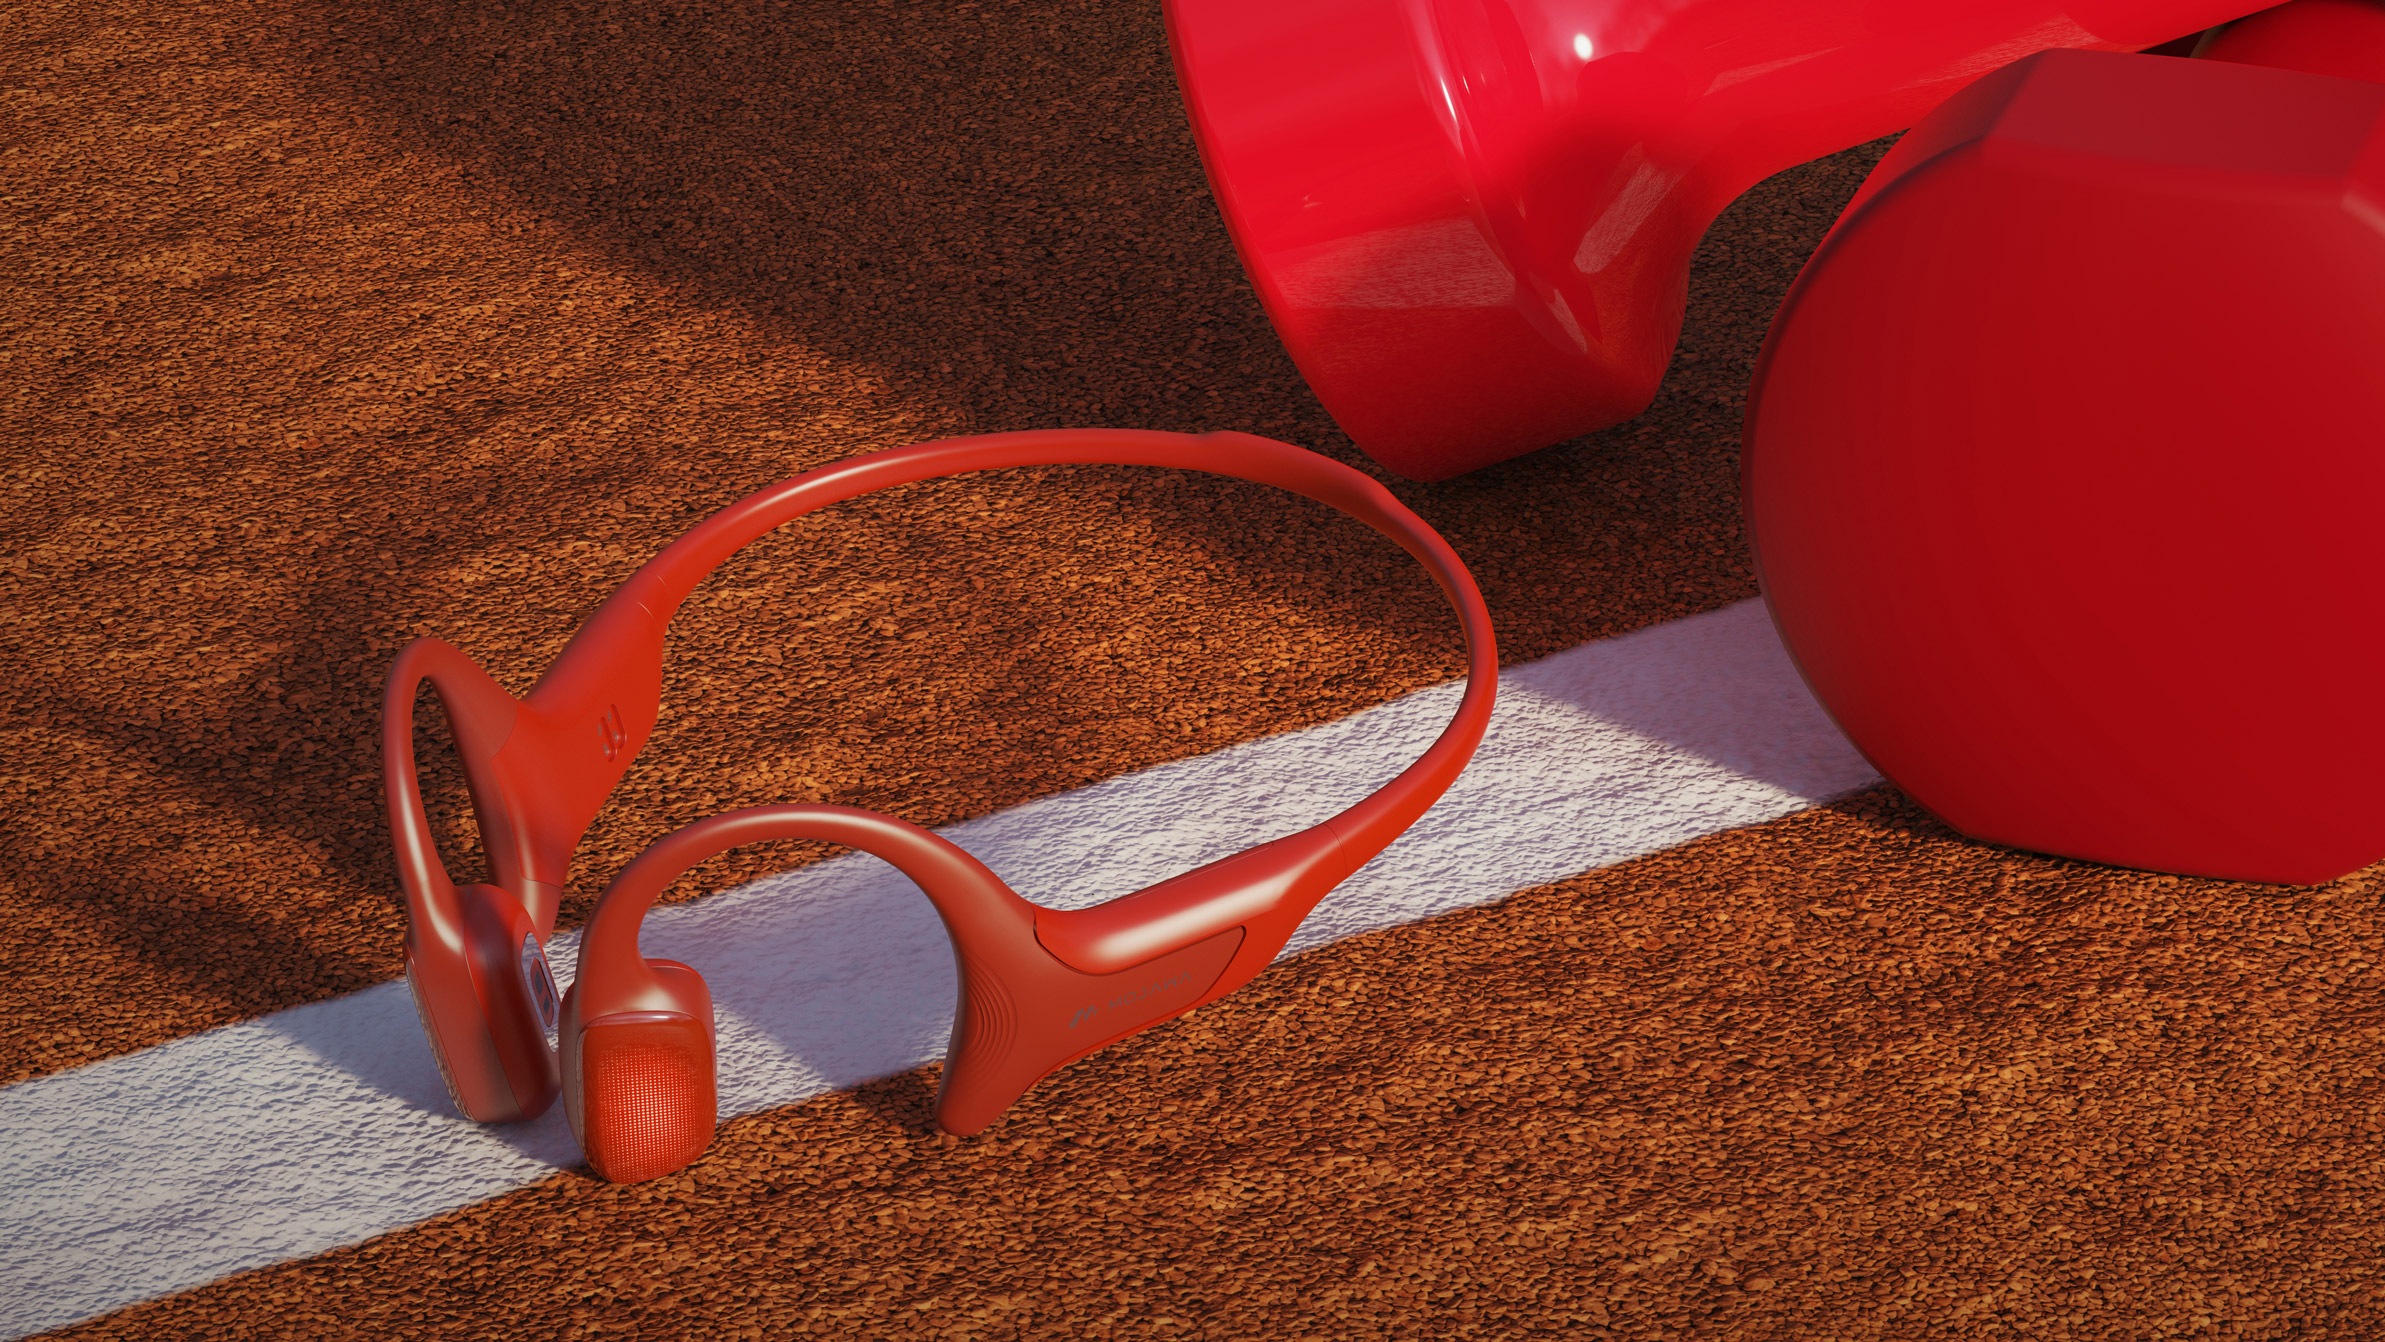 The Mojawa HaptiFit on a tennis court next to a pair of red weights.